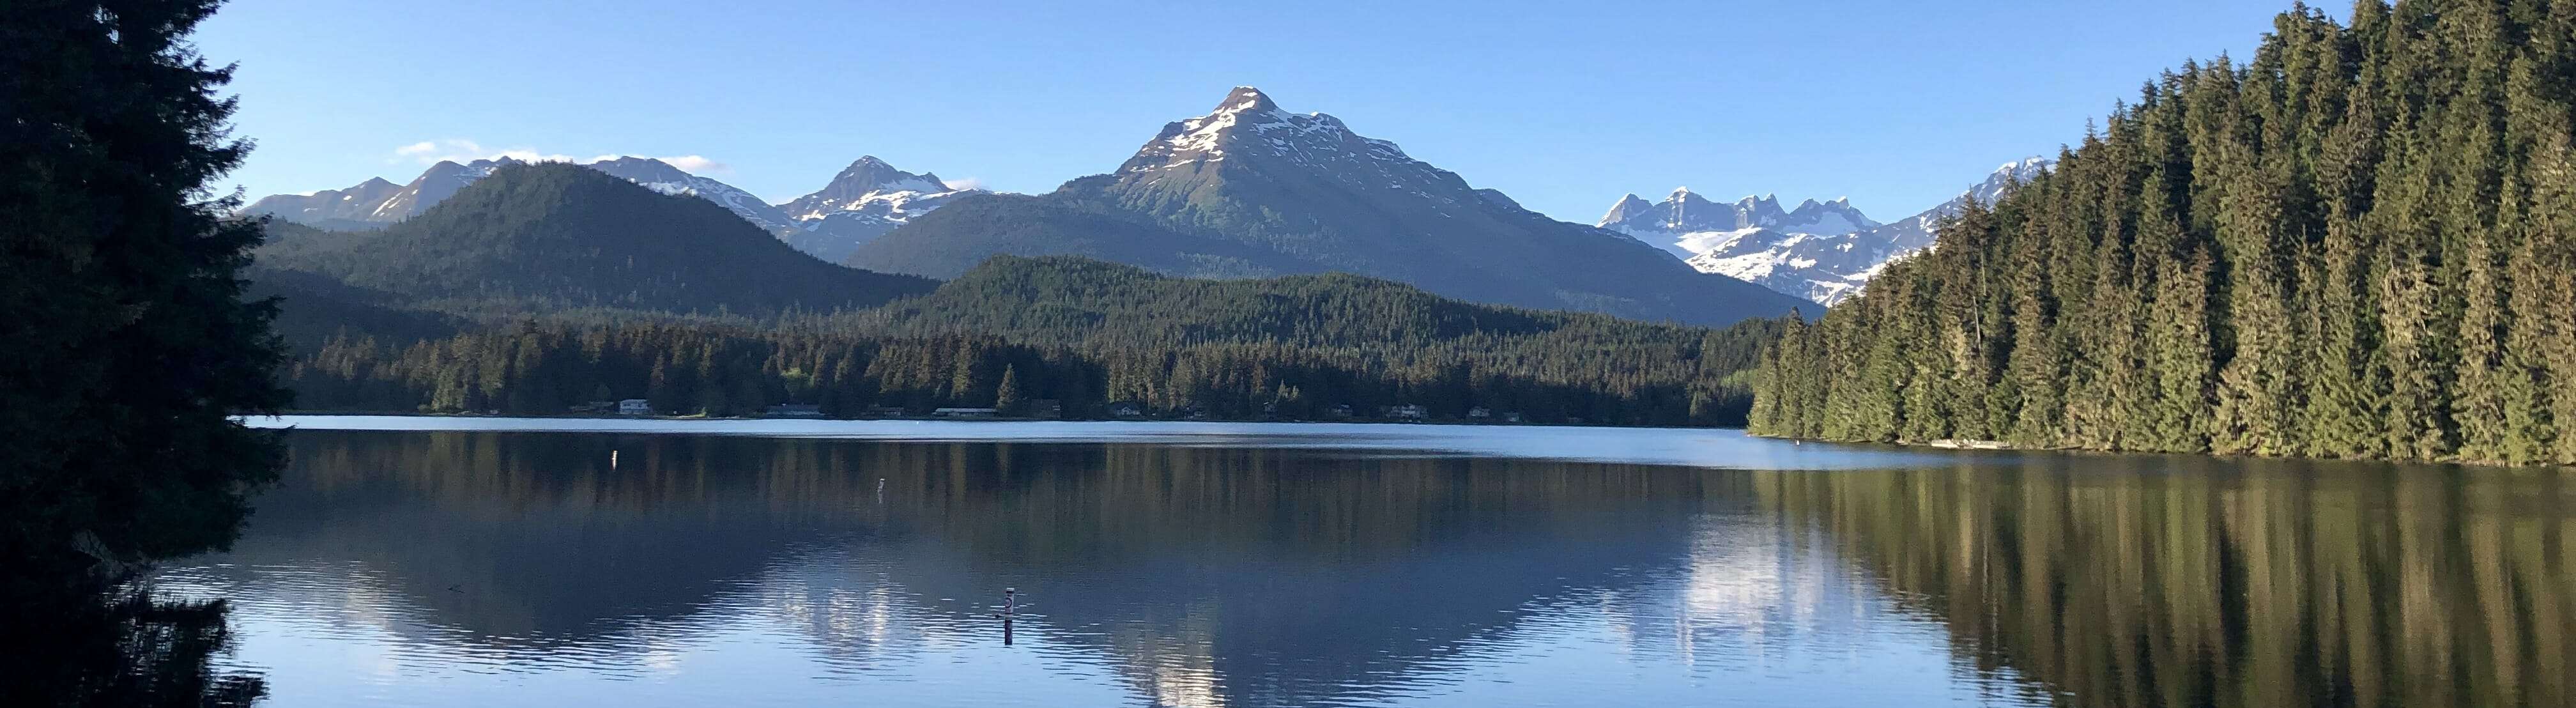 Auke Lake with the mountains in the background.